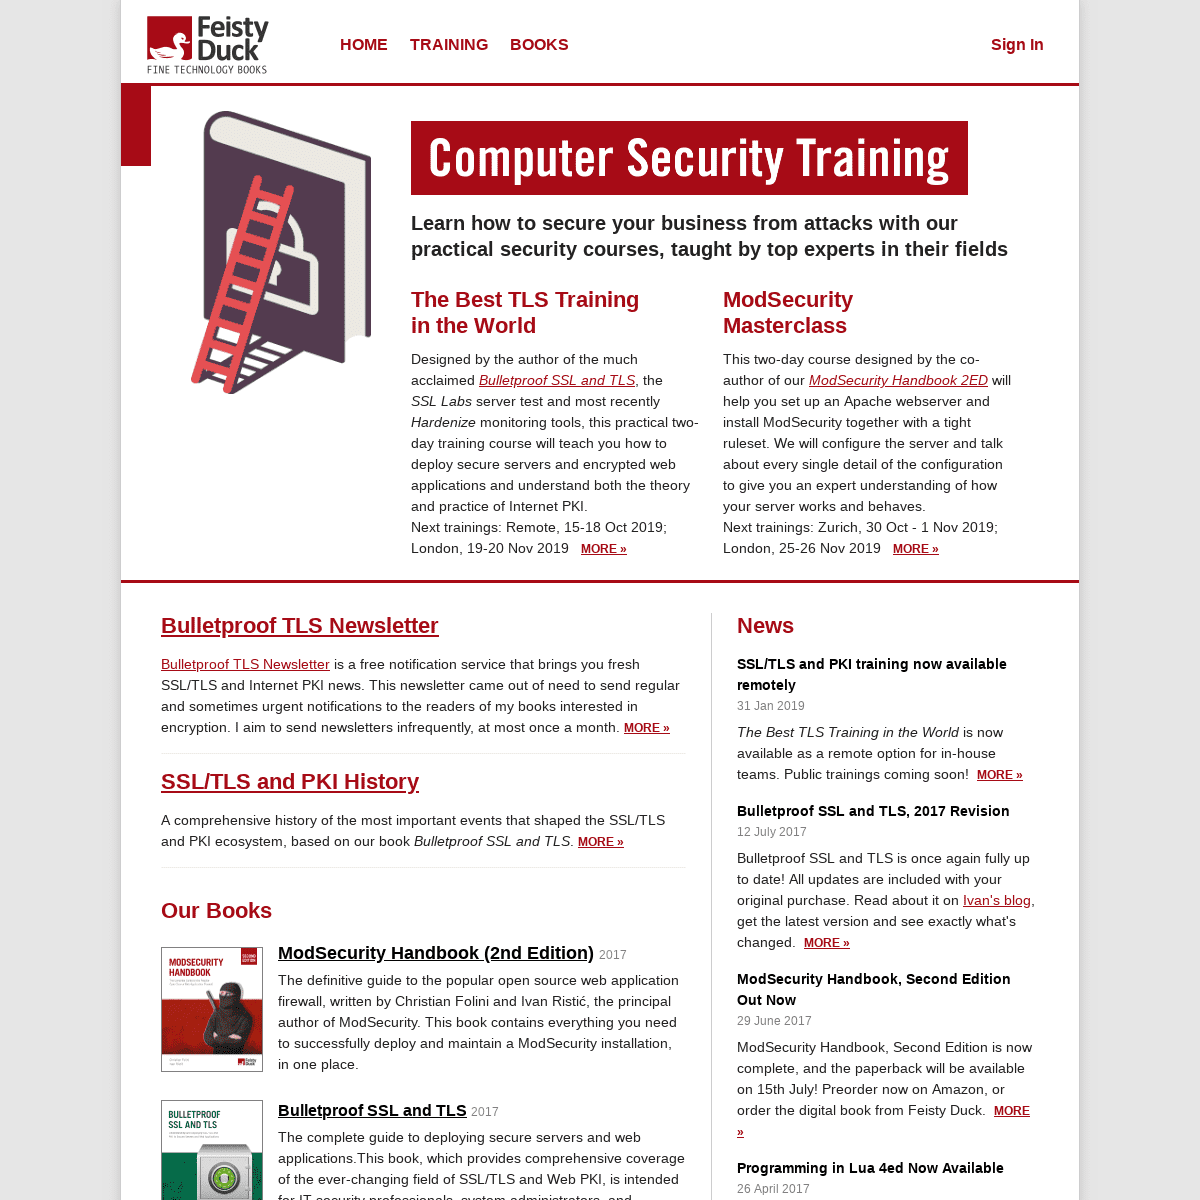 Feisty Duck - Fine Computer Security and Open Source Books and Training Courses